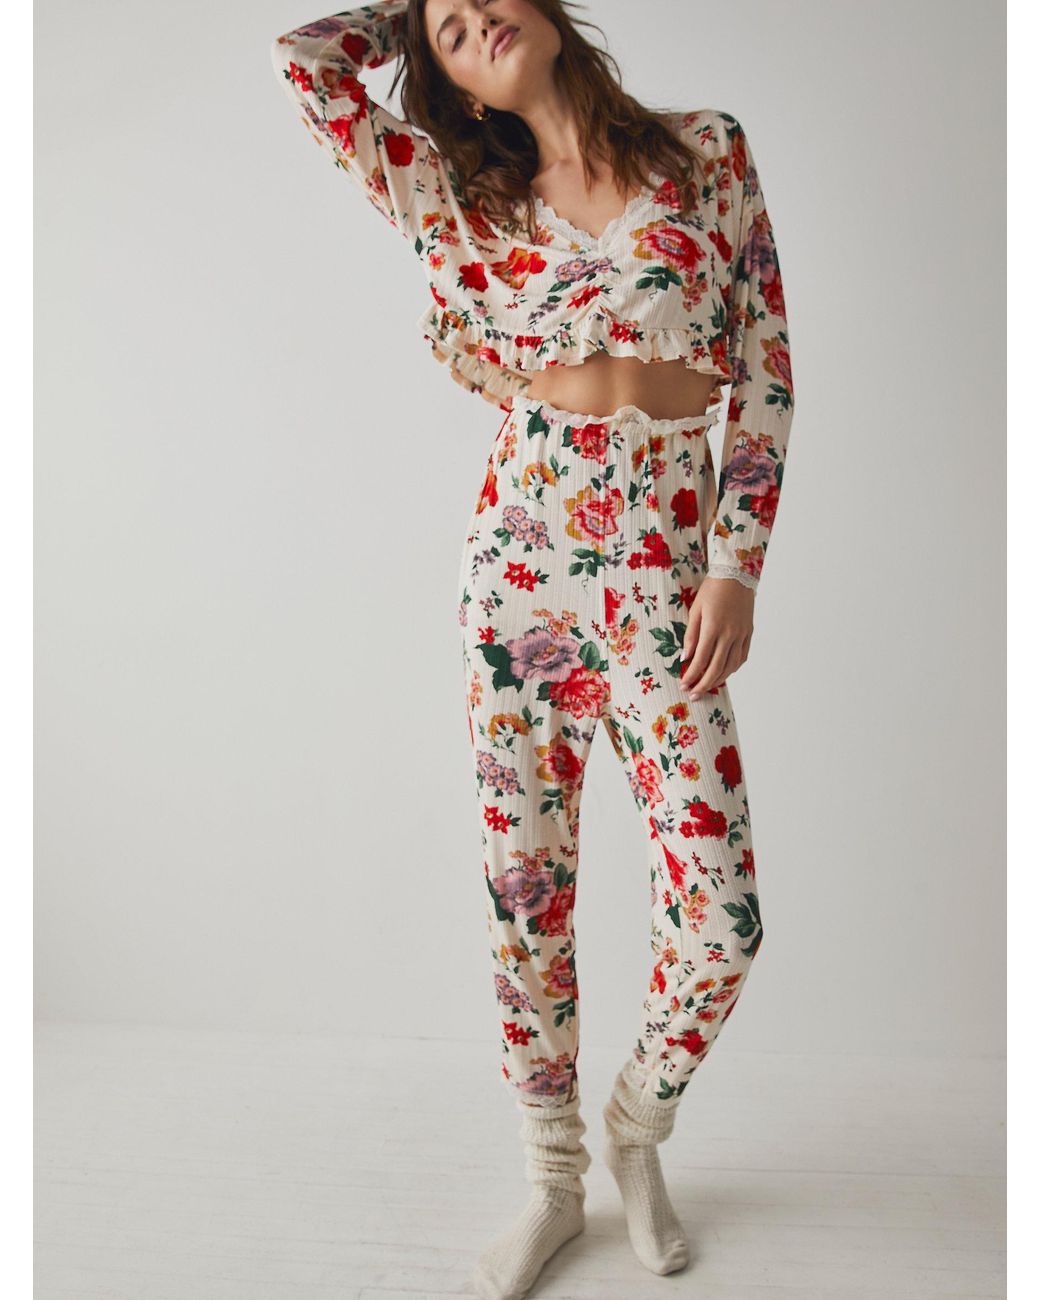 Free People On Point Pj Set in White